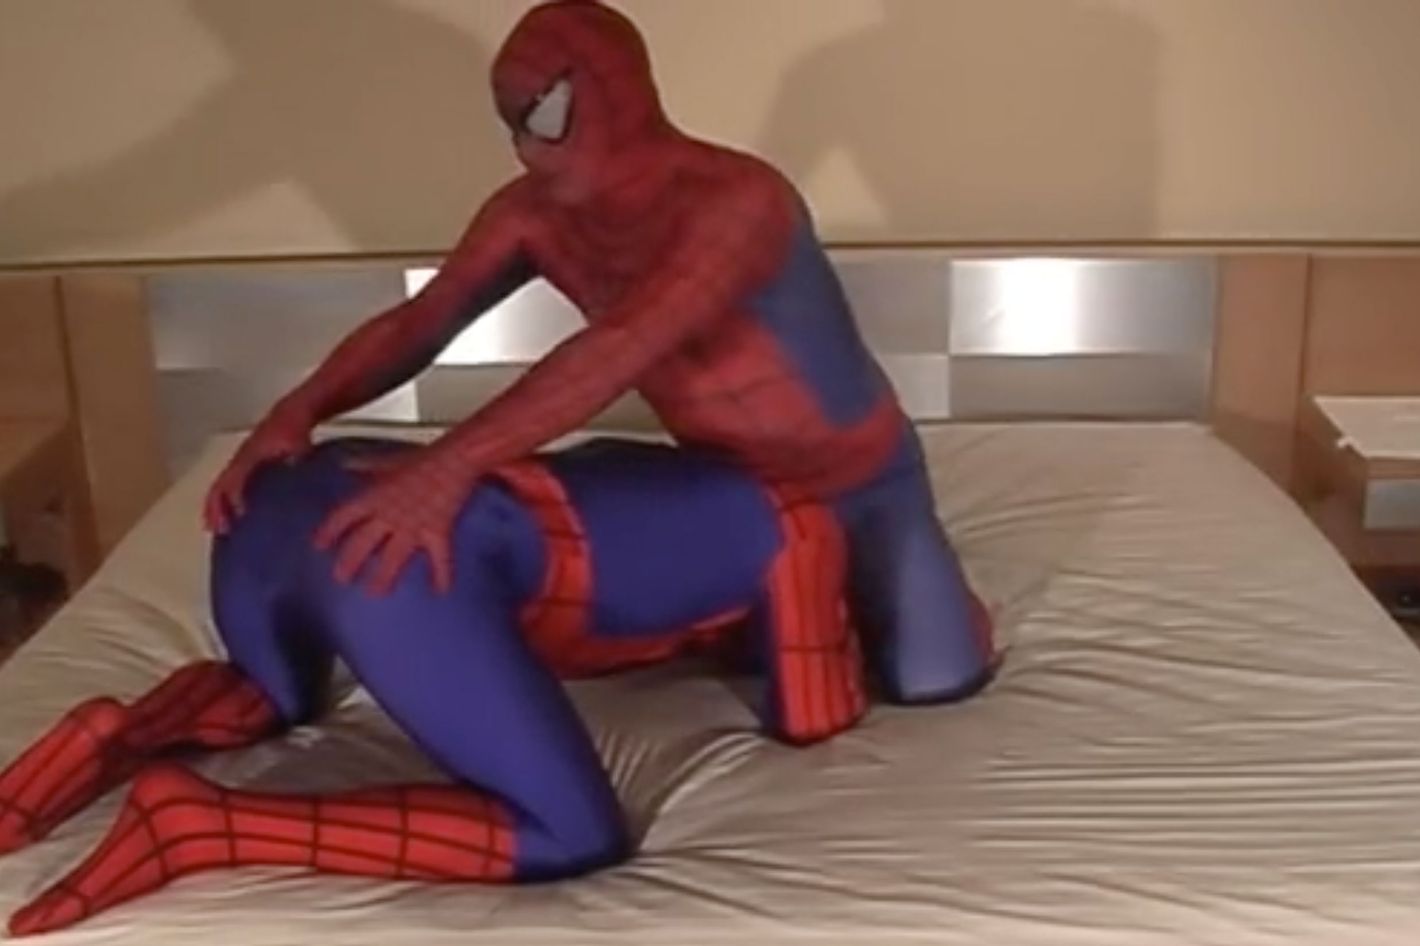 1420px x 946px - Who Made the Viral Spider-Man Spanking Video?